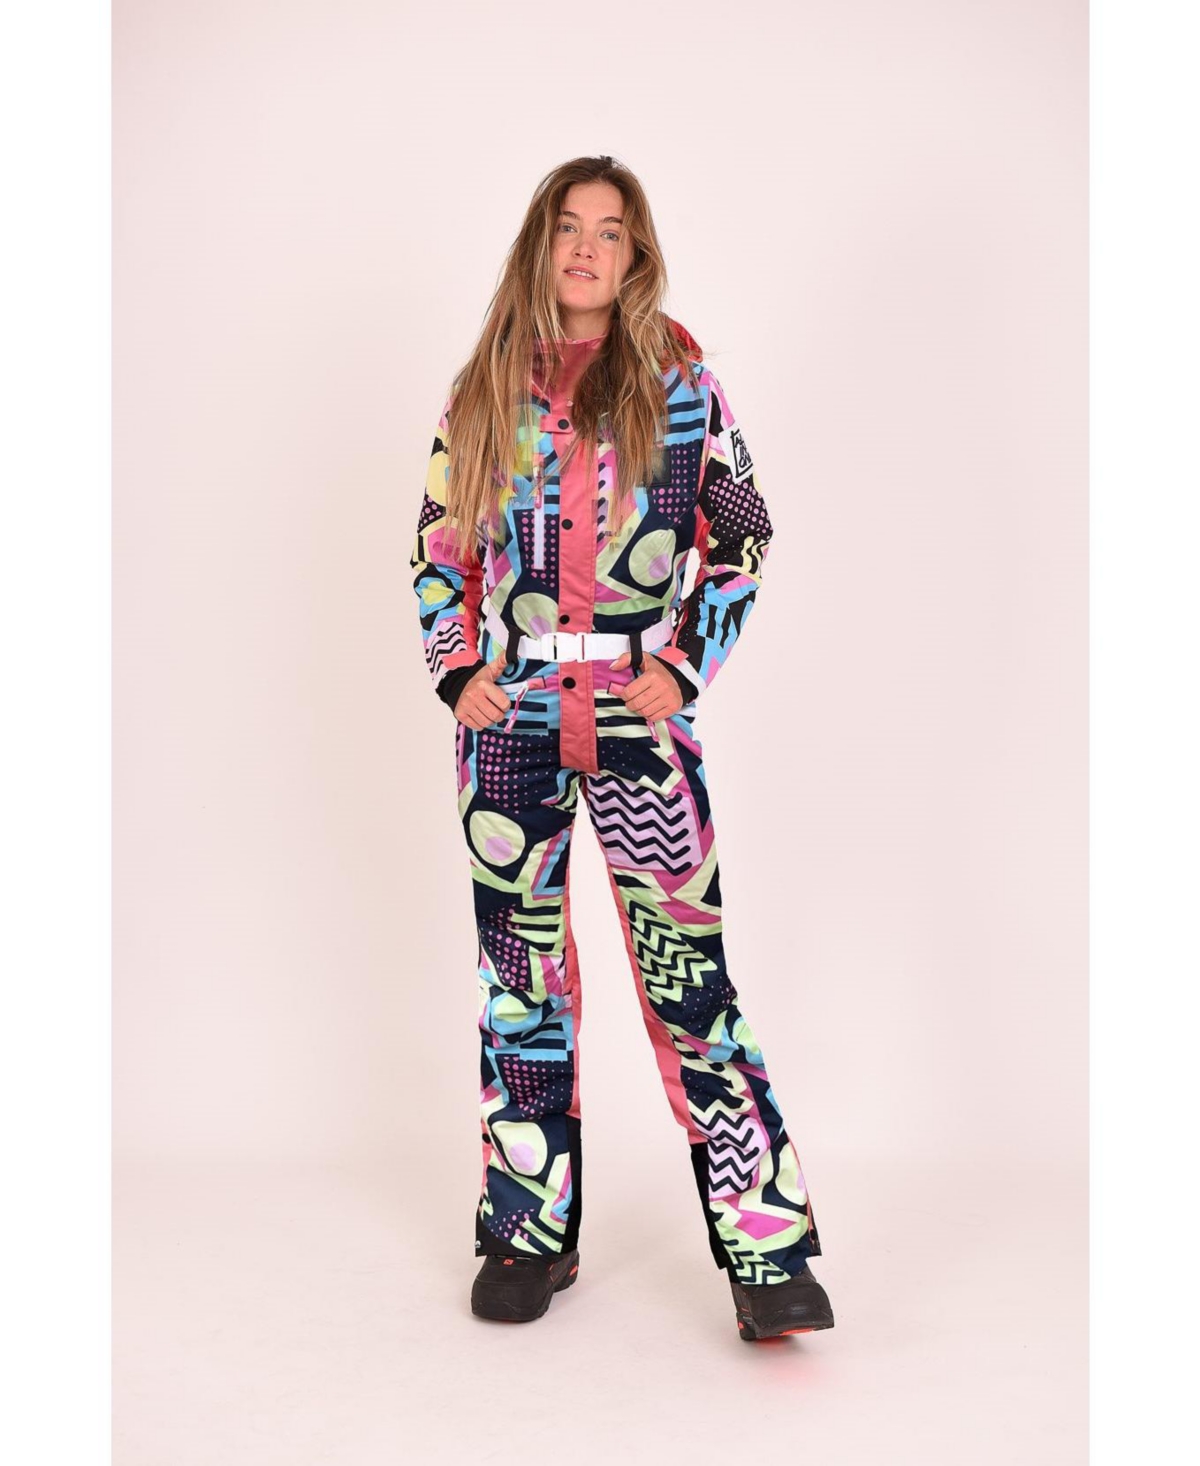 Saved by The Bell Women's Ski Suit - Multi